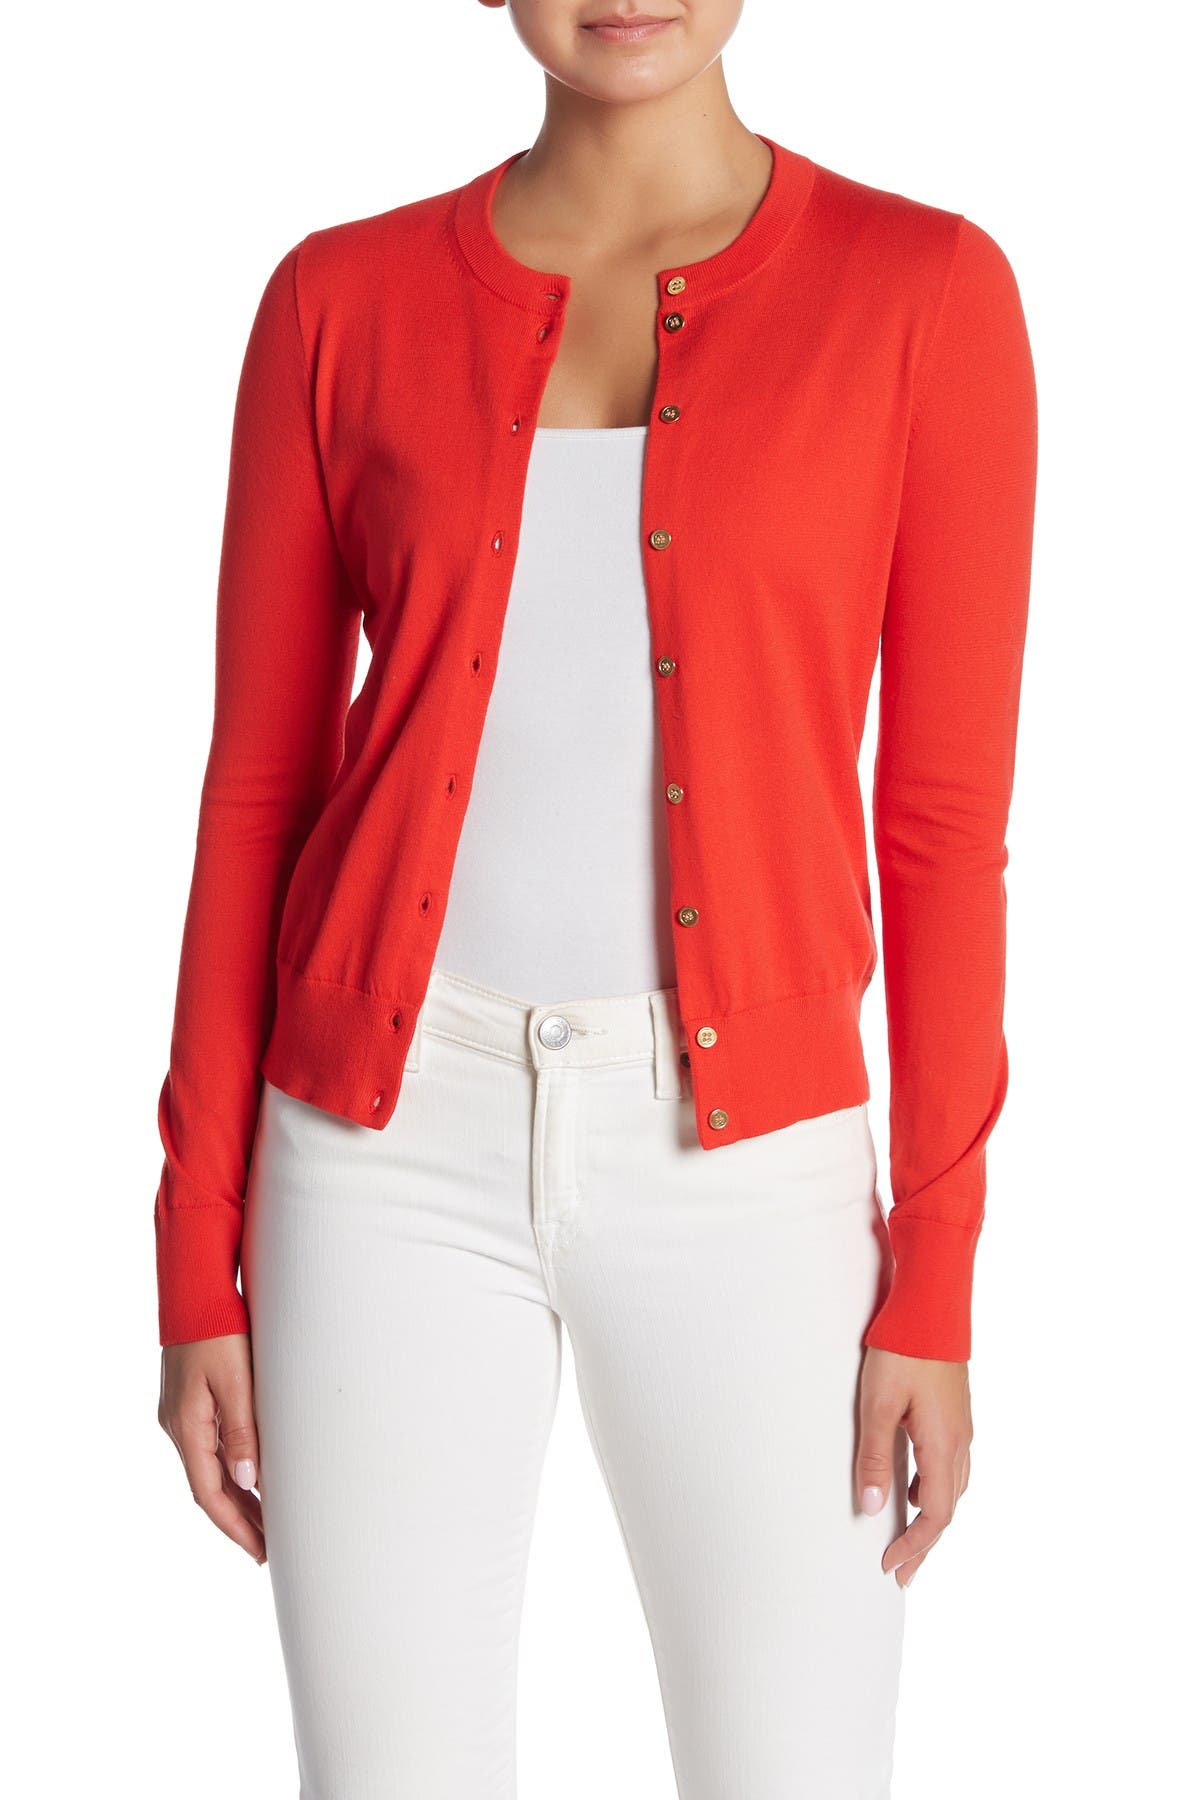 J. Crew | Front Button Knit Cardigan | Nordstrom Rack